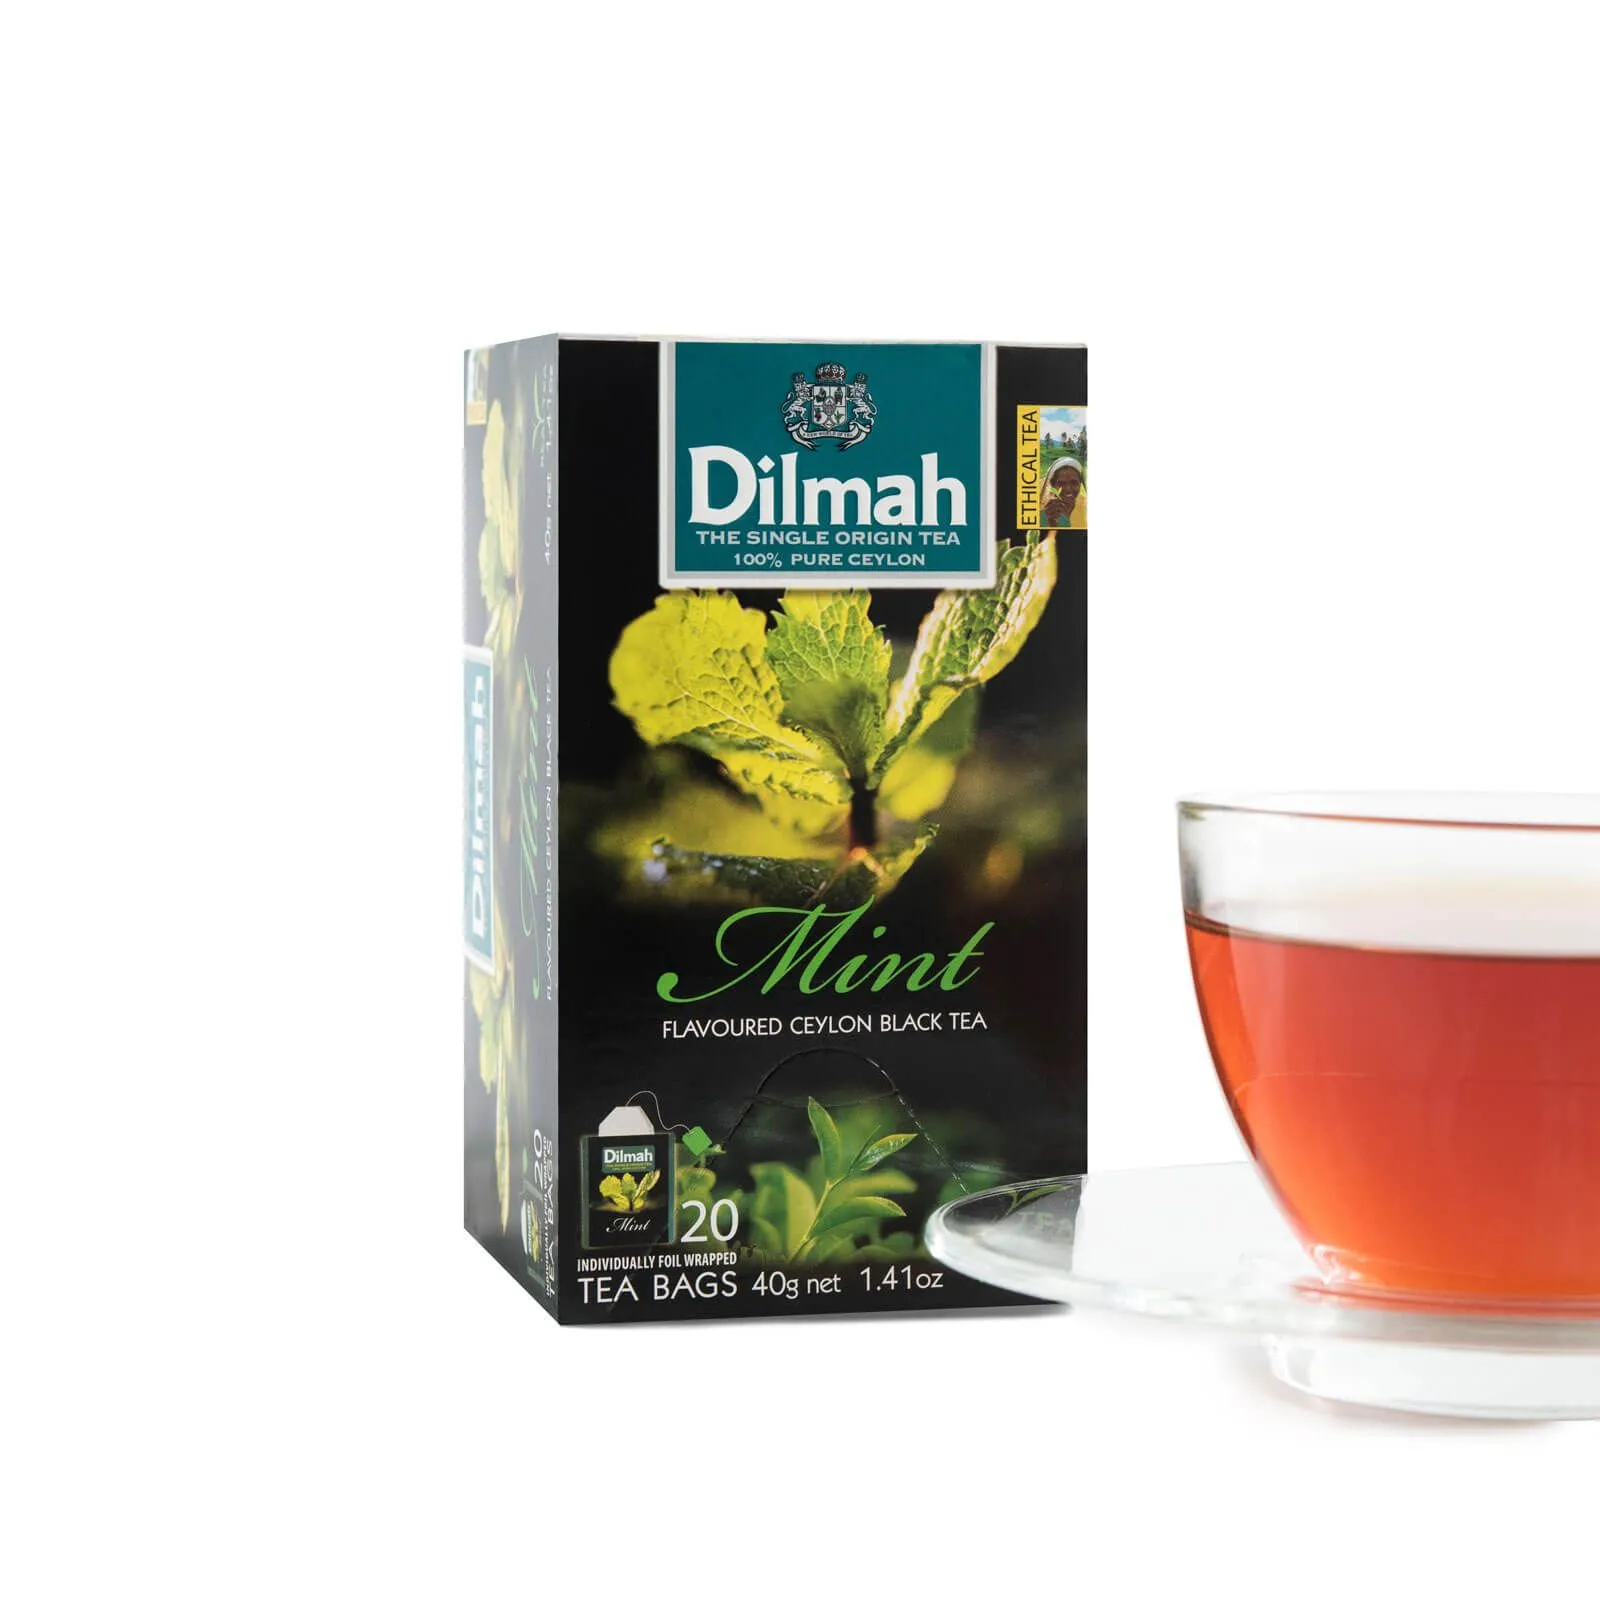 Pack of 20 individually wrapped tea bags of Mint black tea and a cup of tea